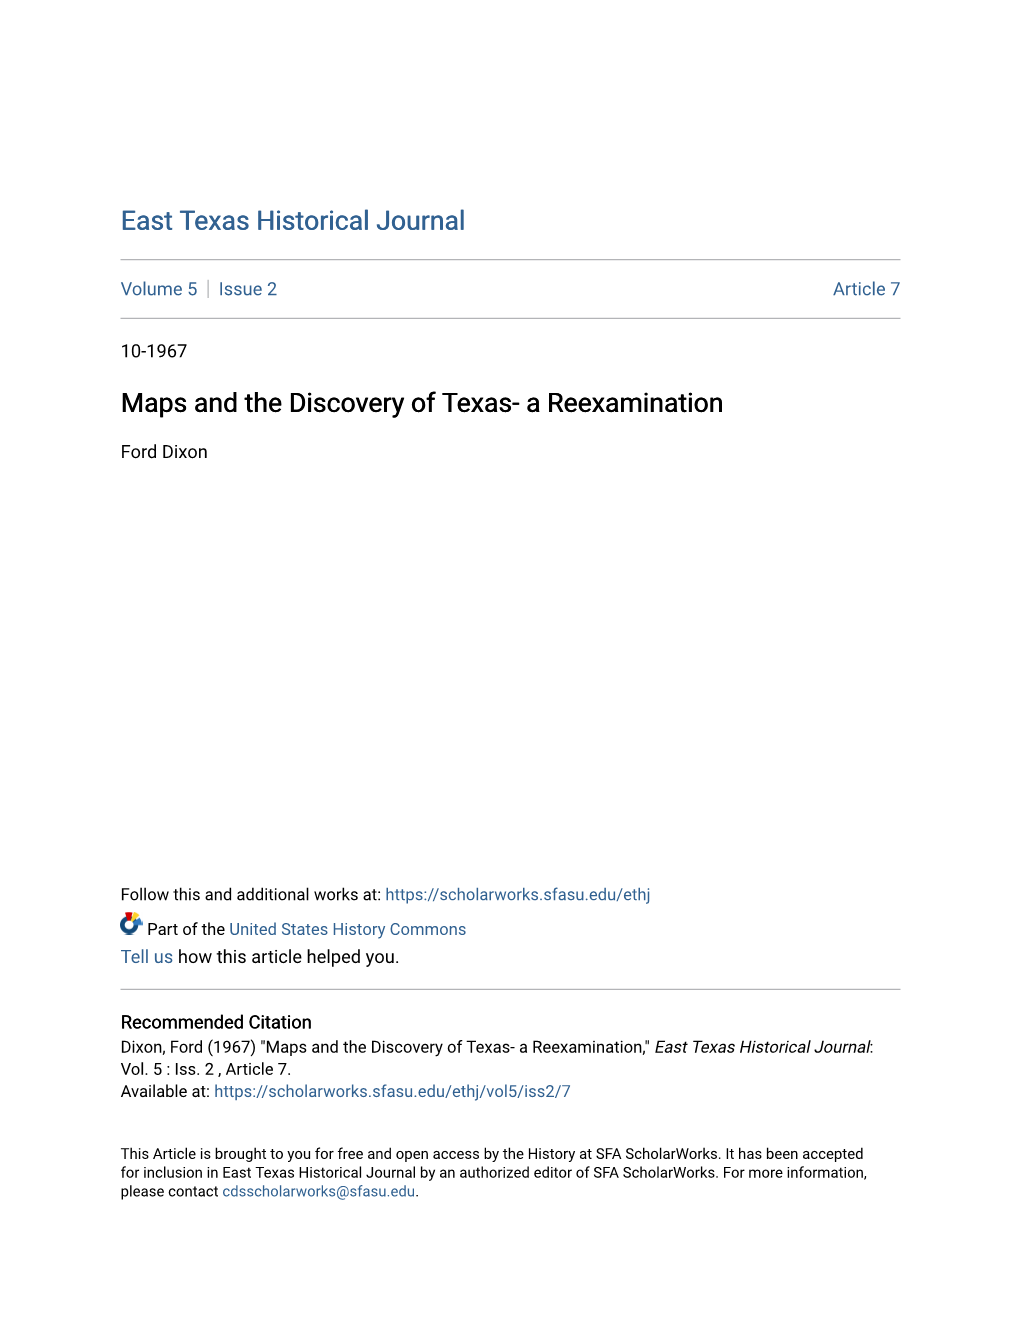 Maps and the Discovery of Texas- a Reexamination